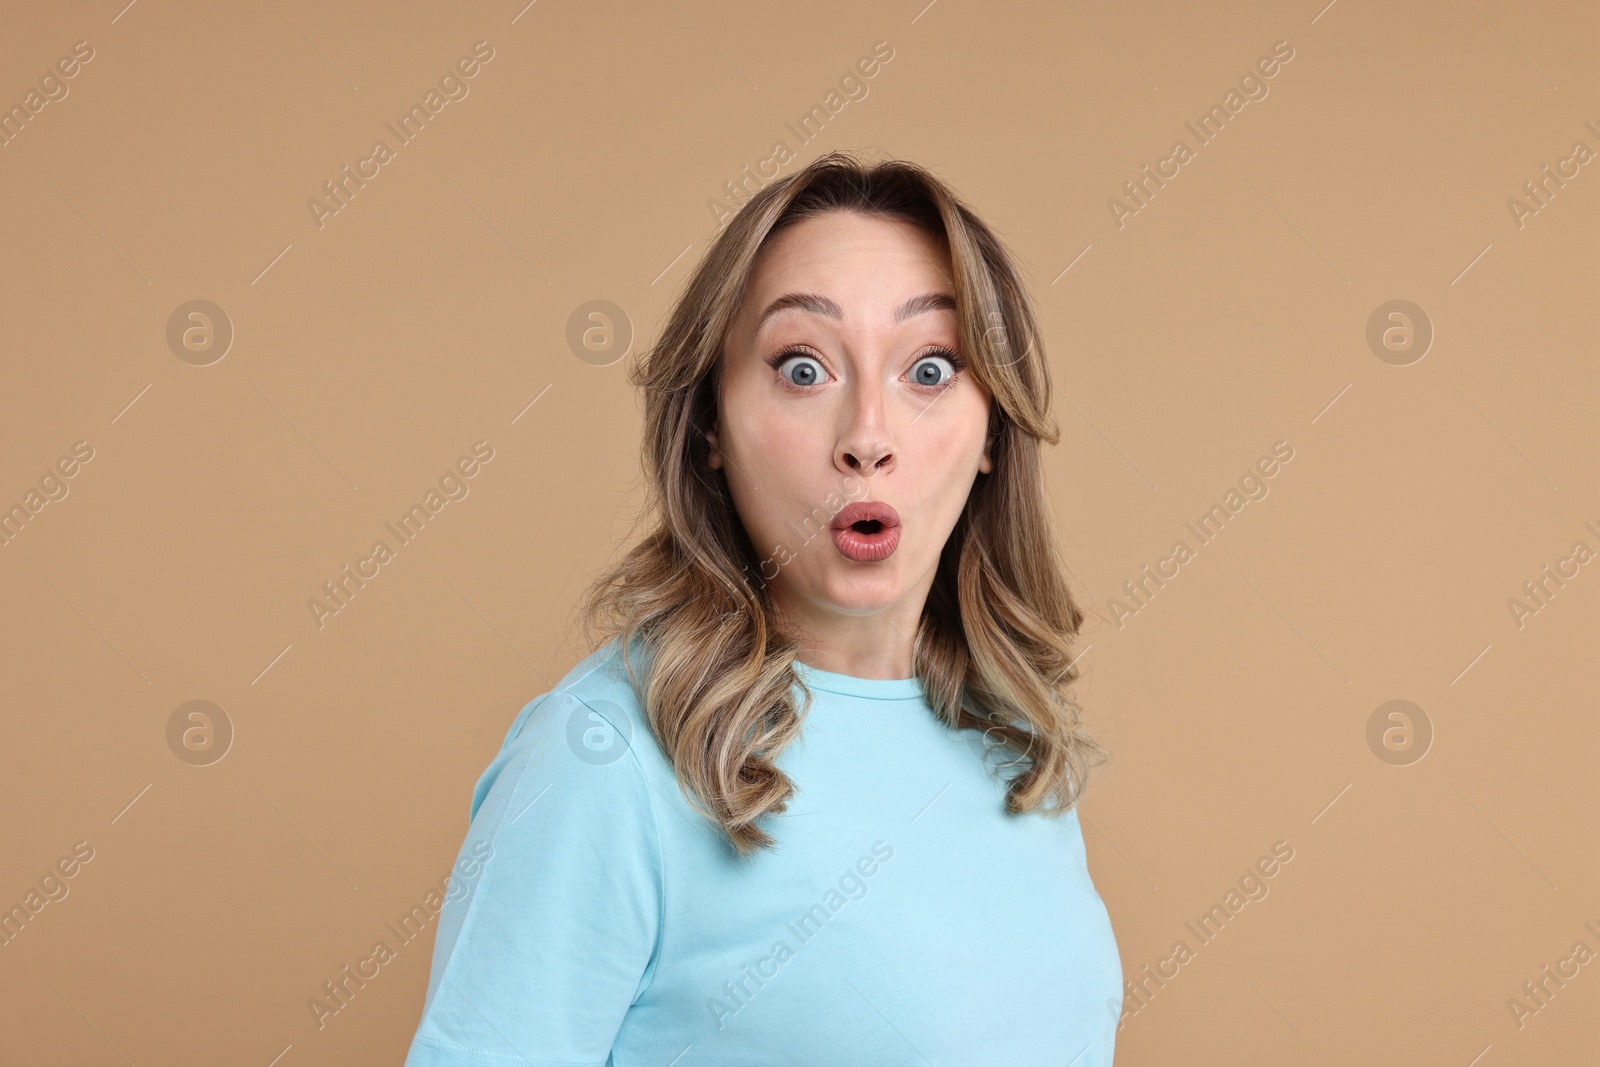 Photo of Portrait of surprised woman on beige background